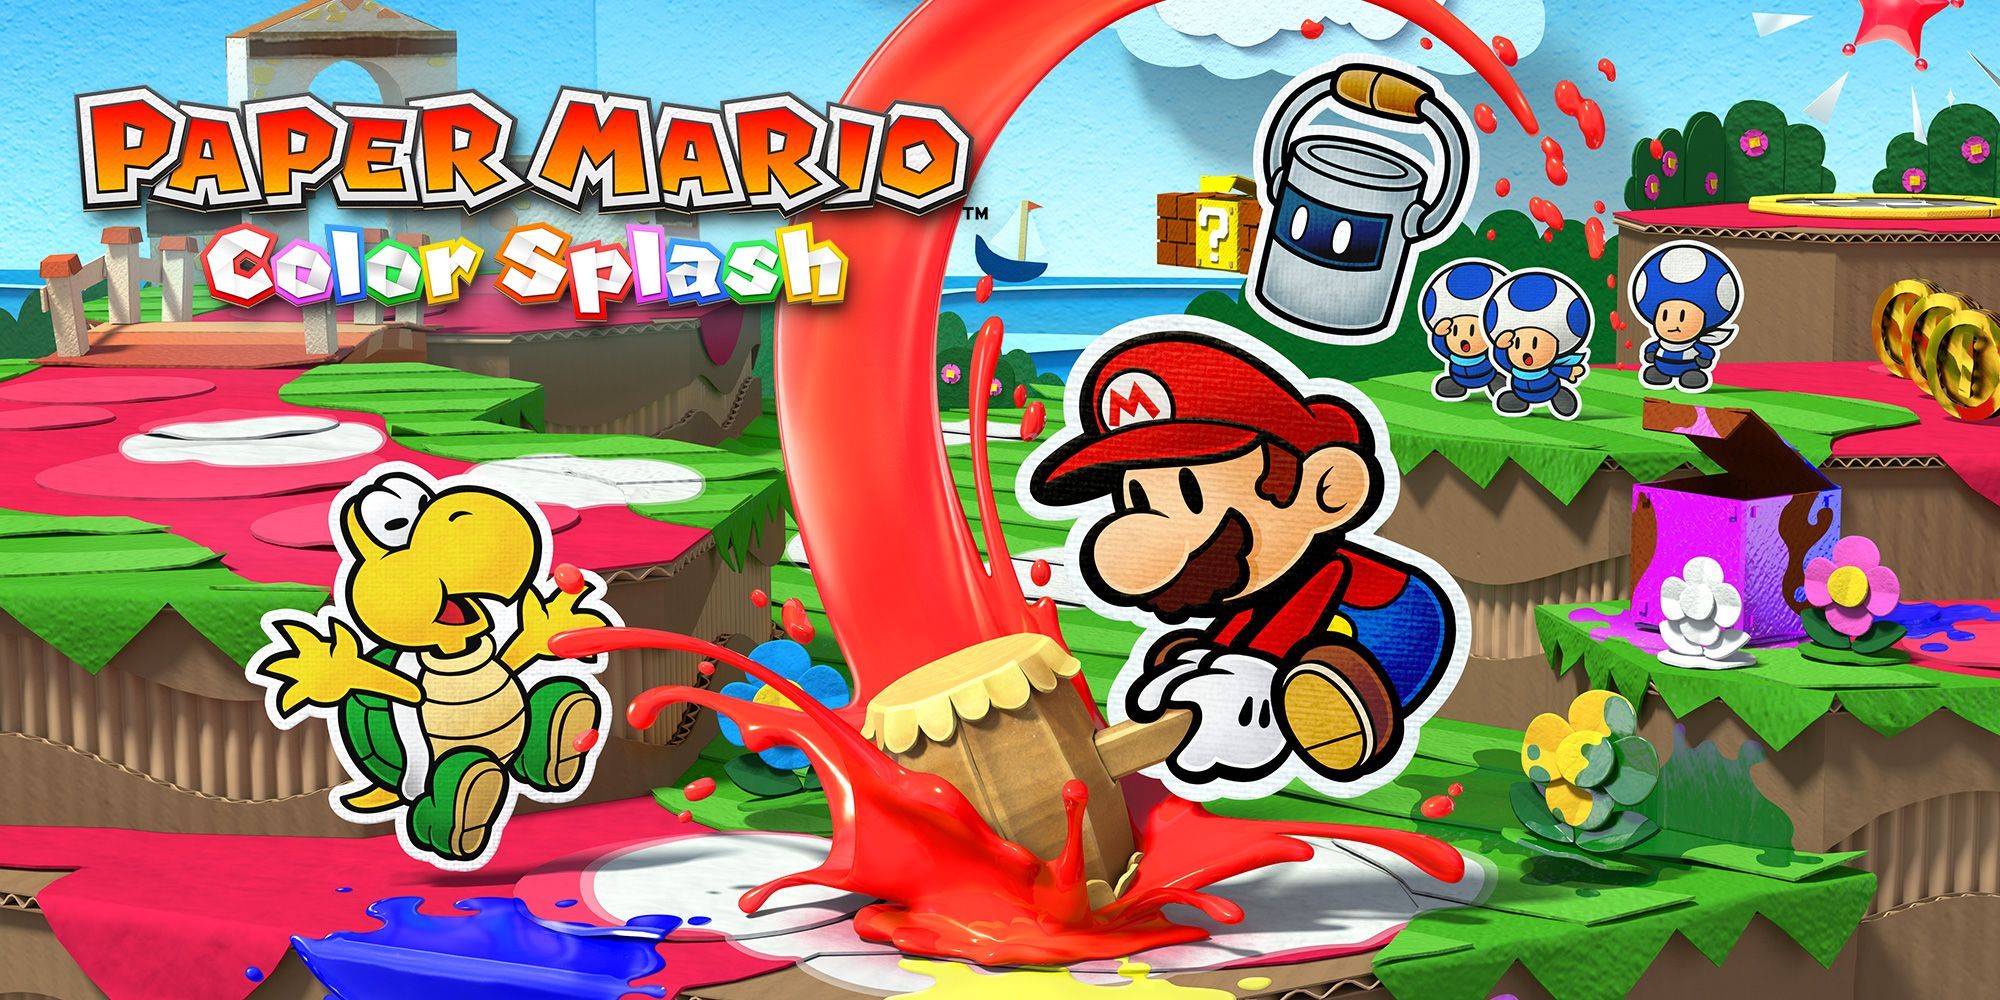 Mario hits red paint with a hammer on Koopa in promotional art for Paper Mario Color Splash